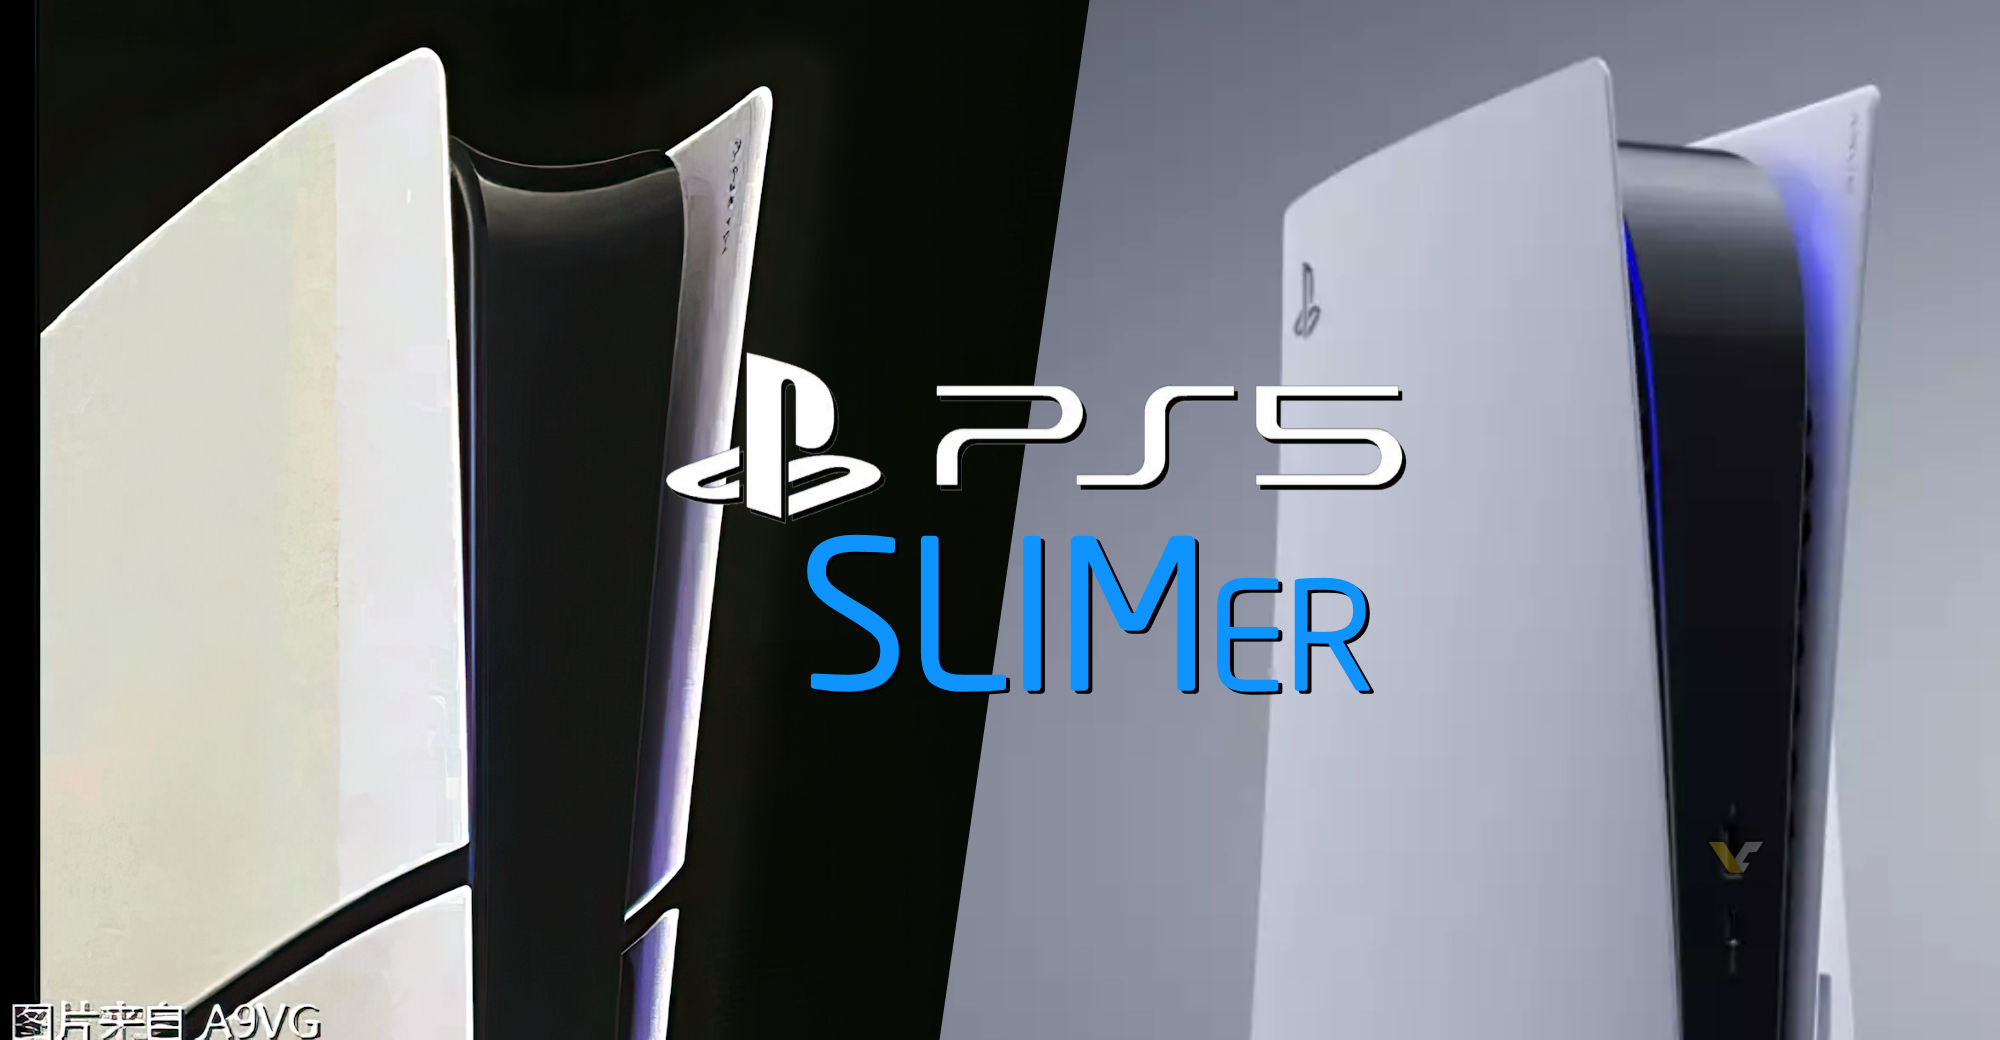 Proven Insider Claims PS5 Pro 100% Confirmed and Release Date 